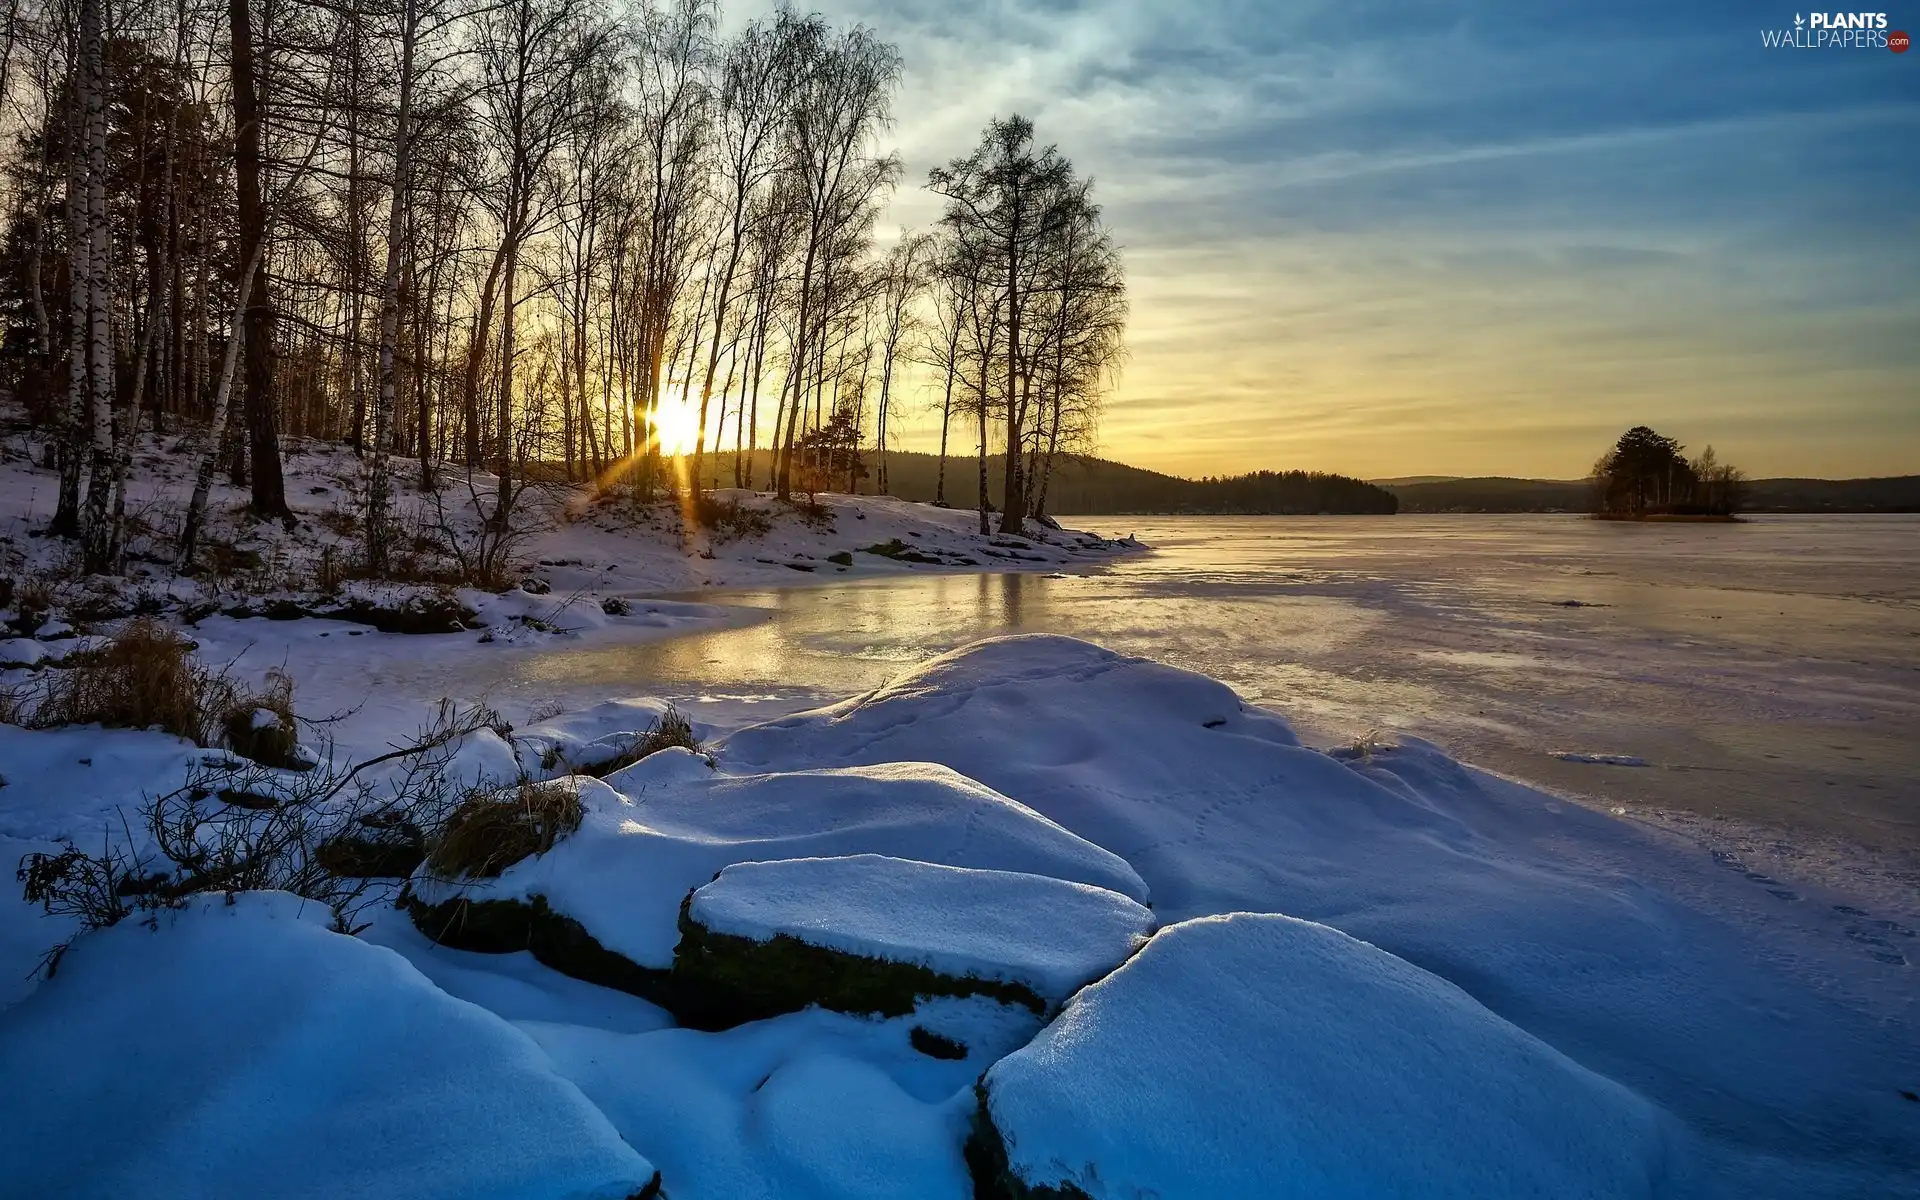 Snowy, winter, Stones, rays of the Sun, viewes, birch, lake, trees, frozen